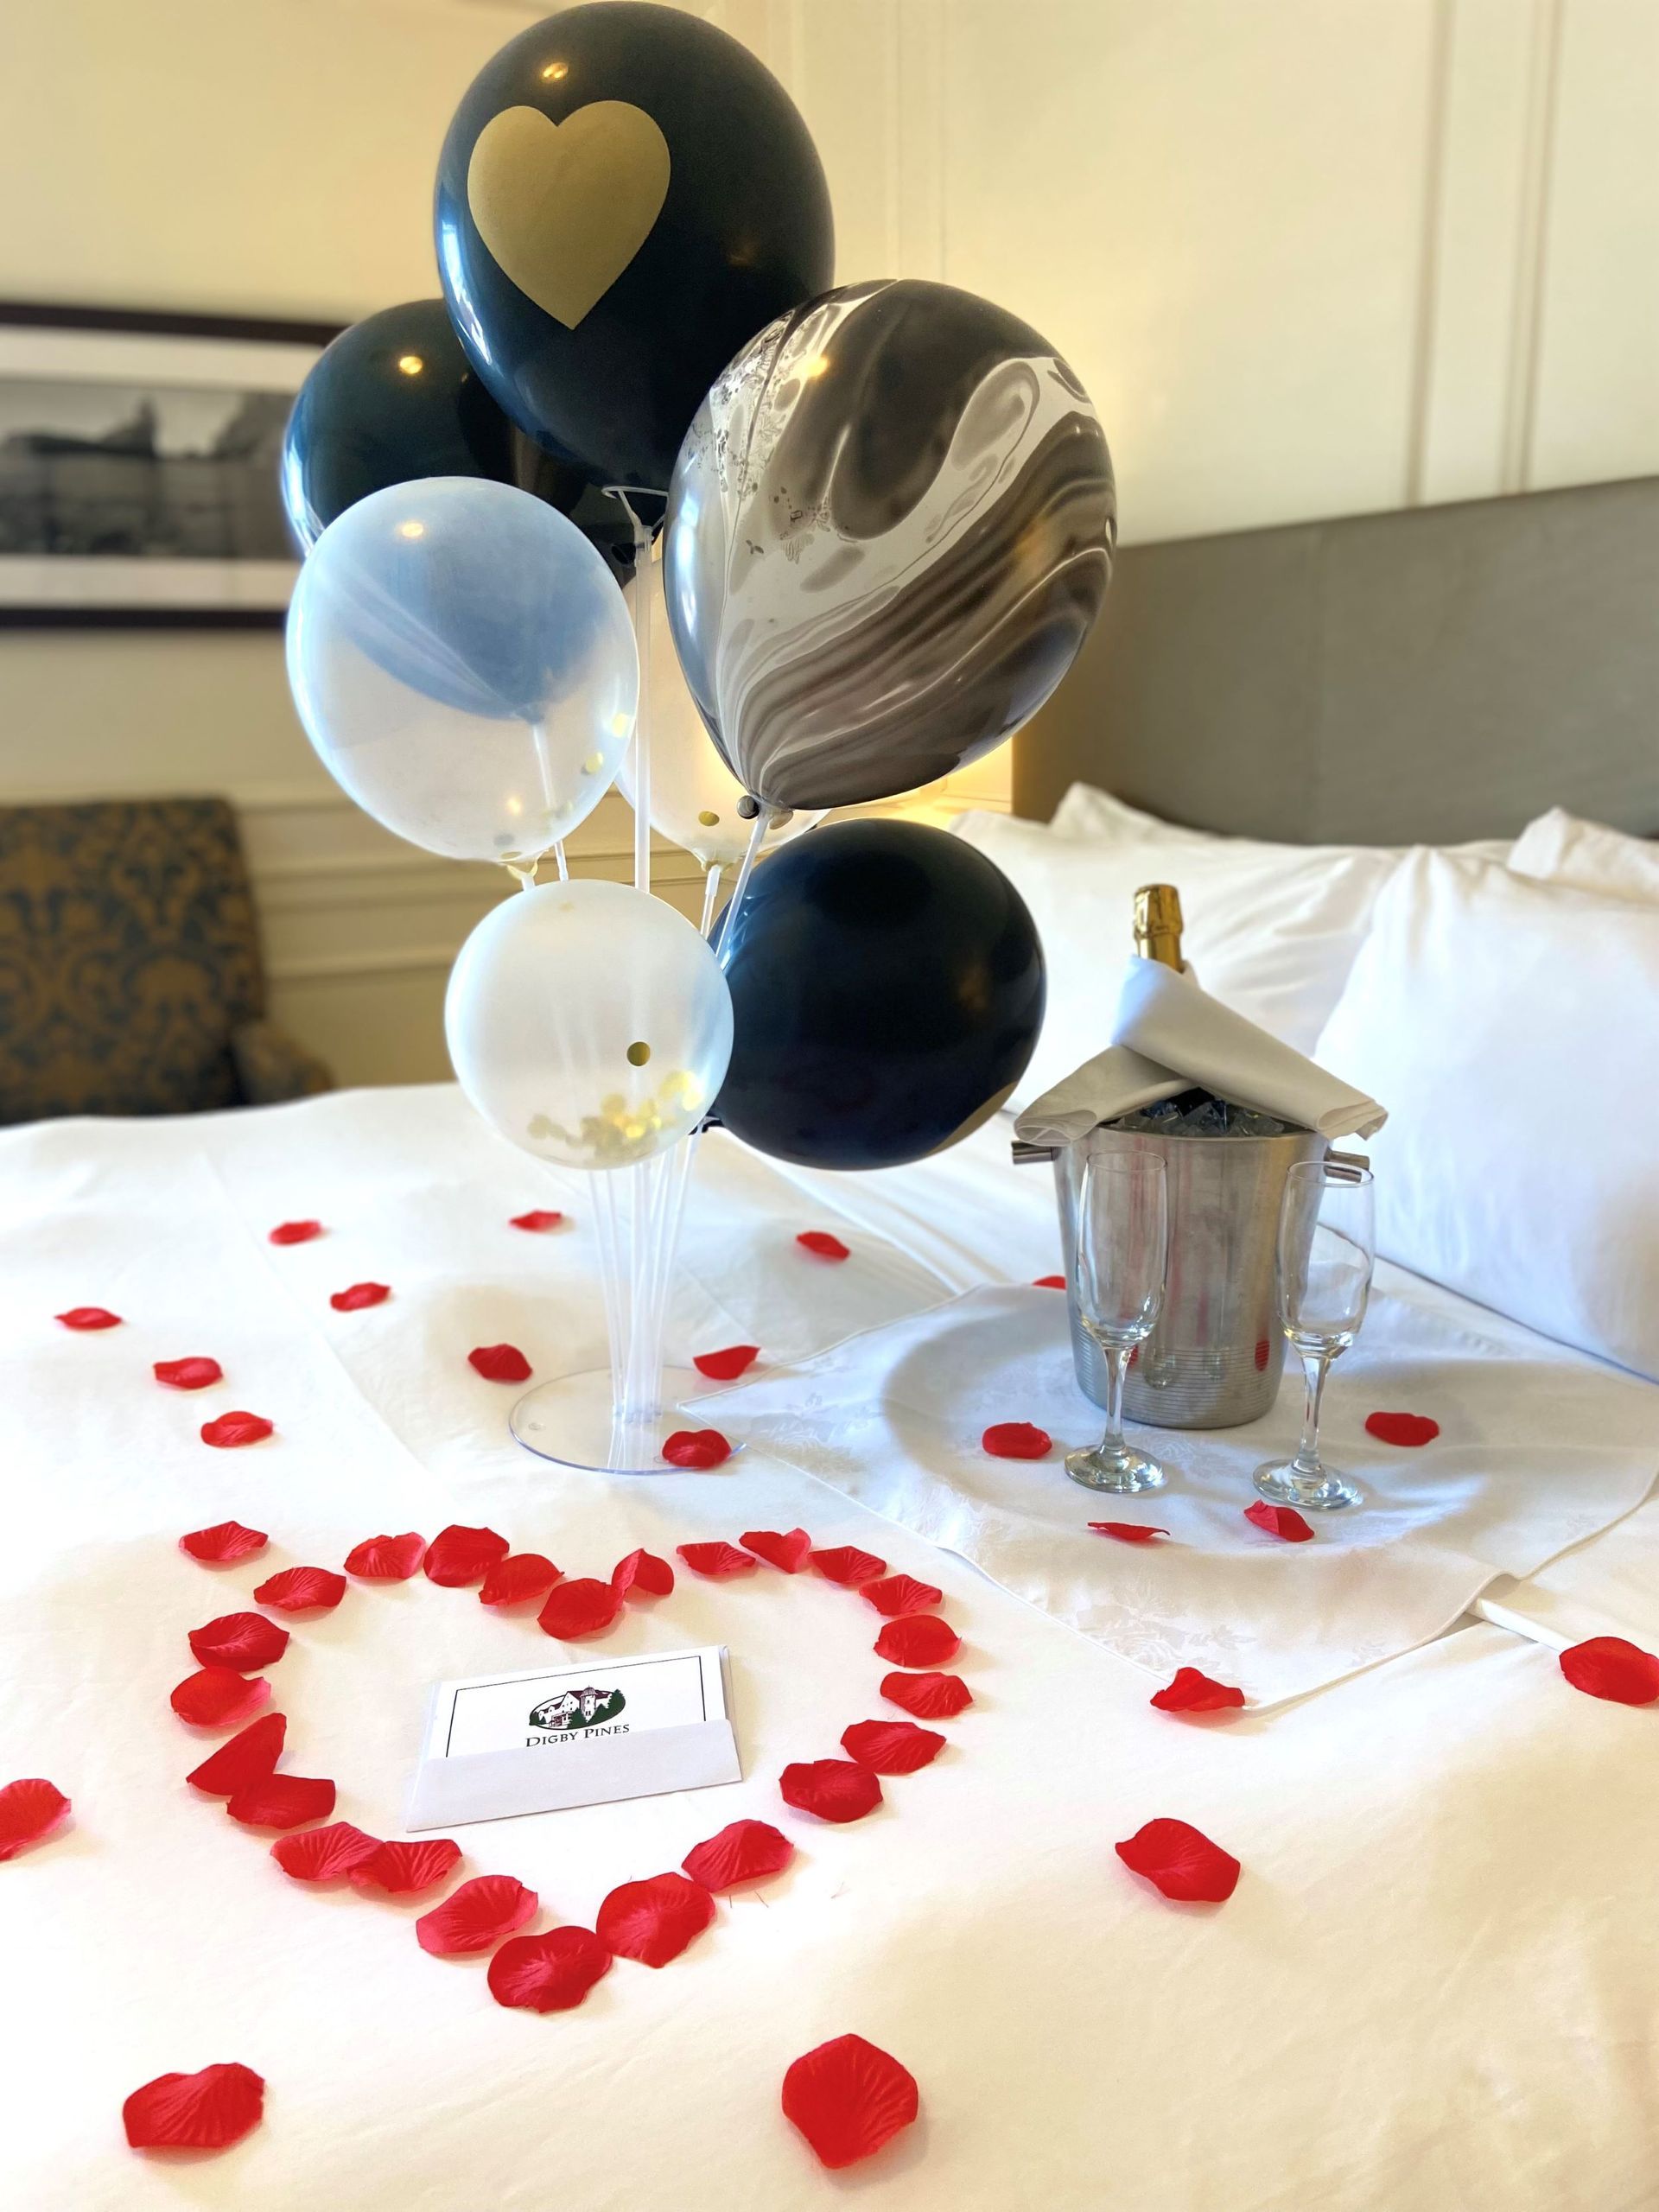 A bed with balloons and rose petals on it